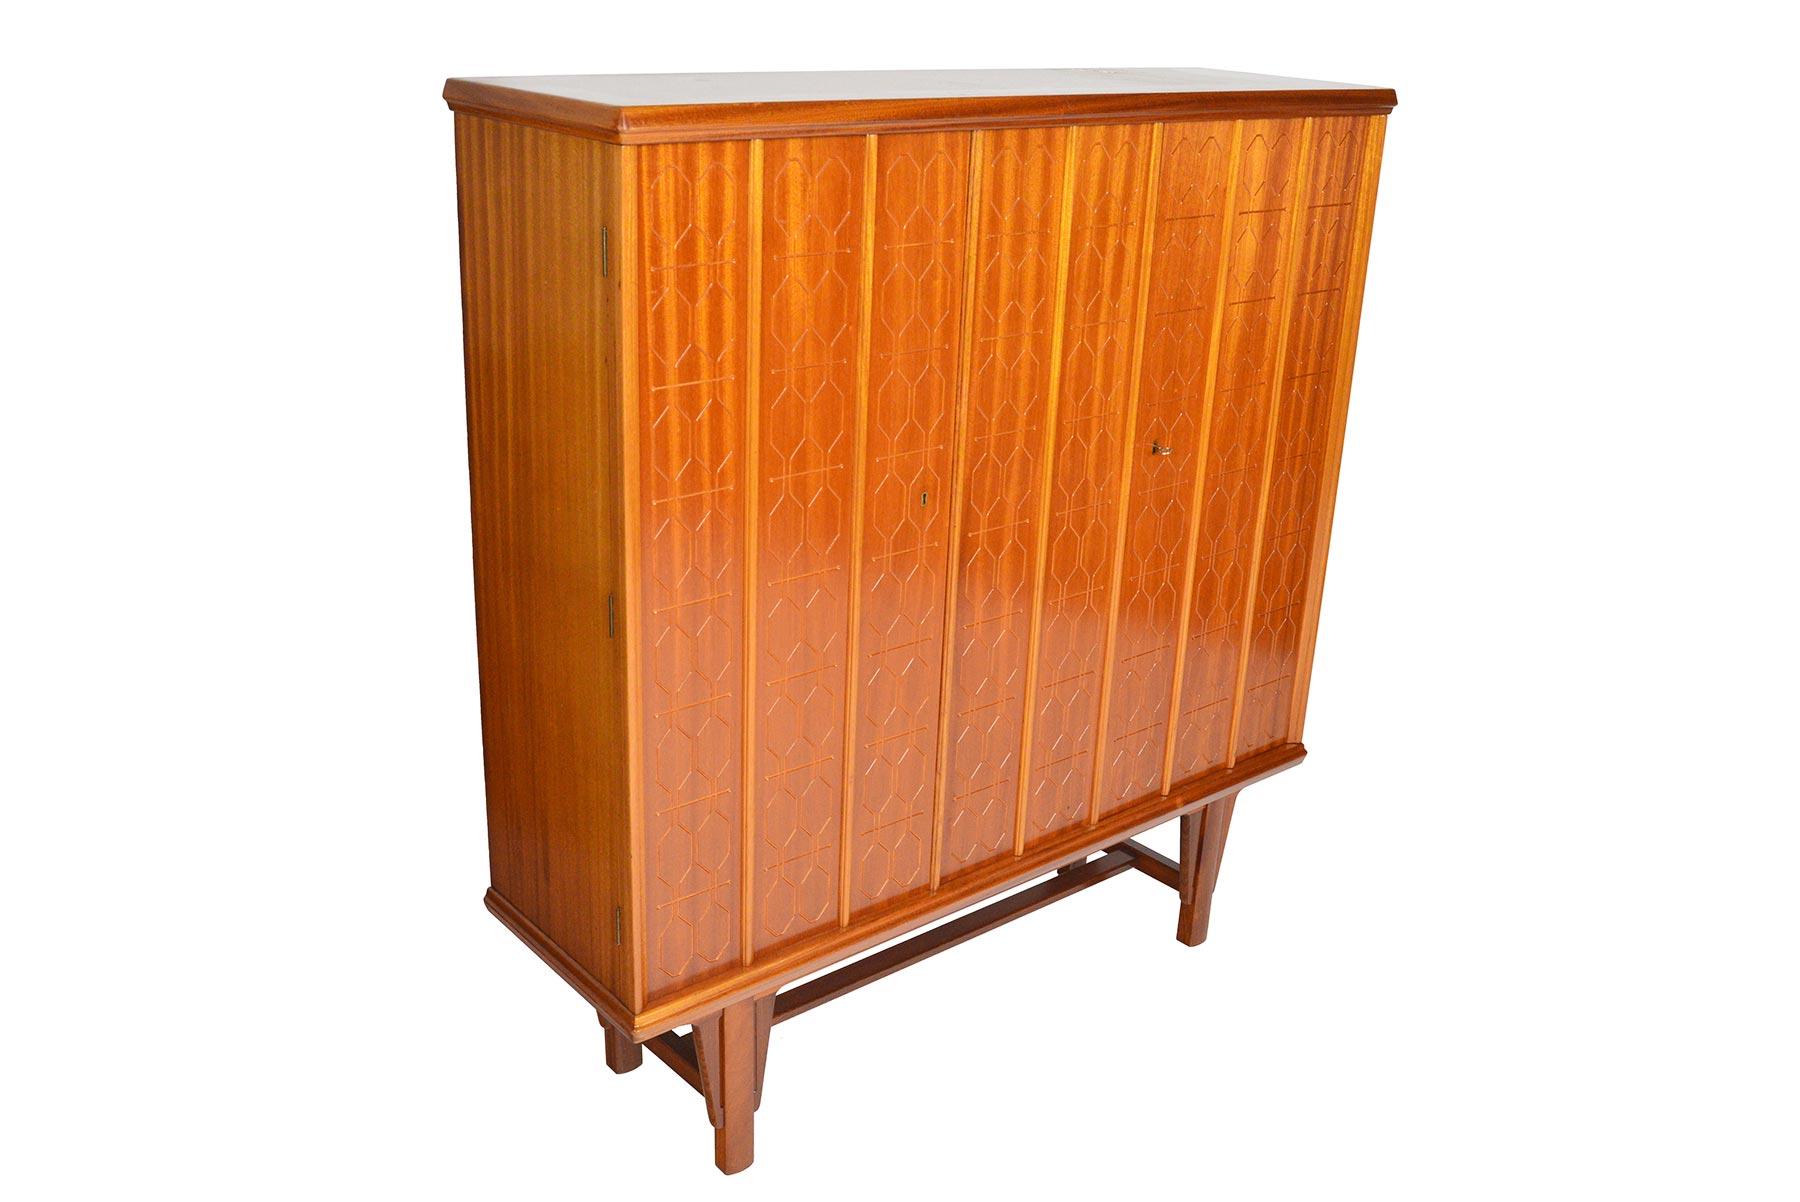 Norwegian Tall Rastad and Relling Tall Geometric Credenza in Mahogany